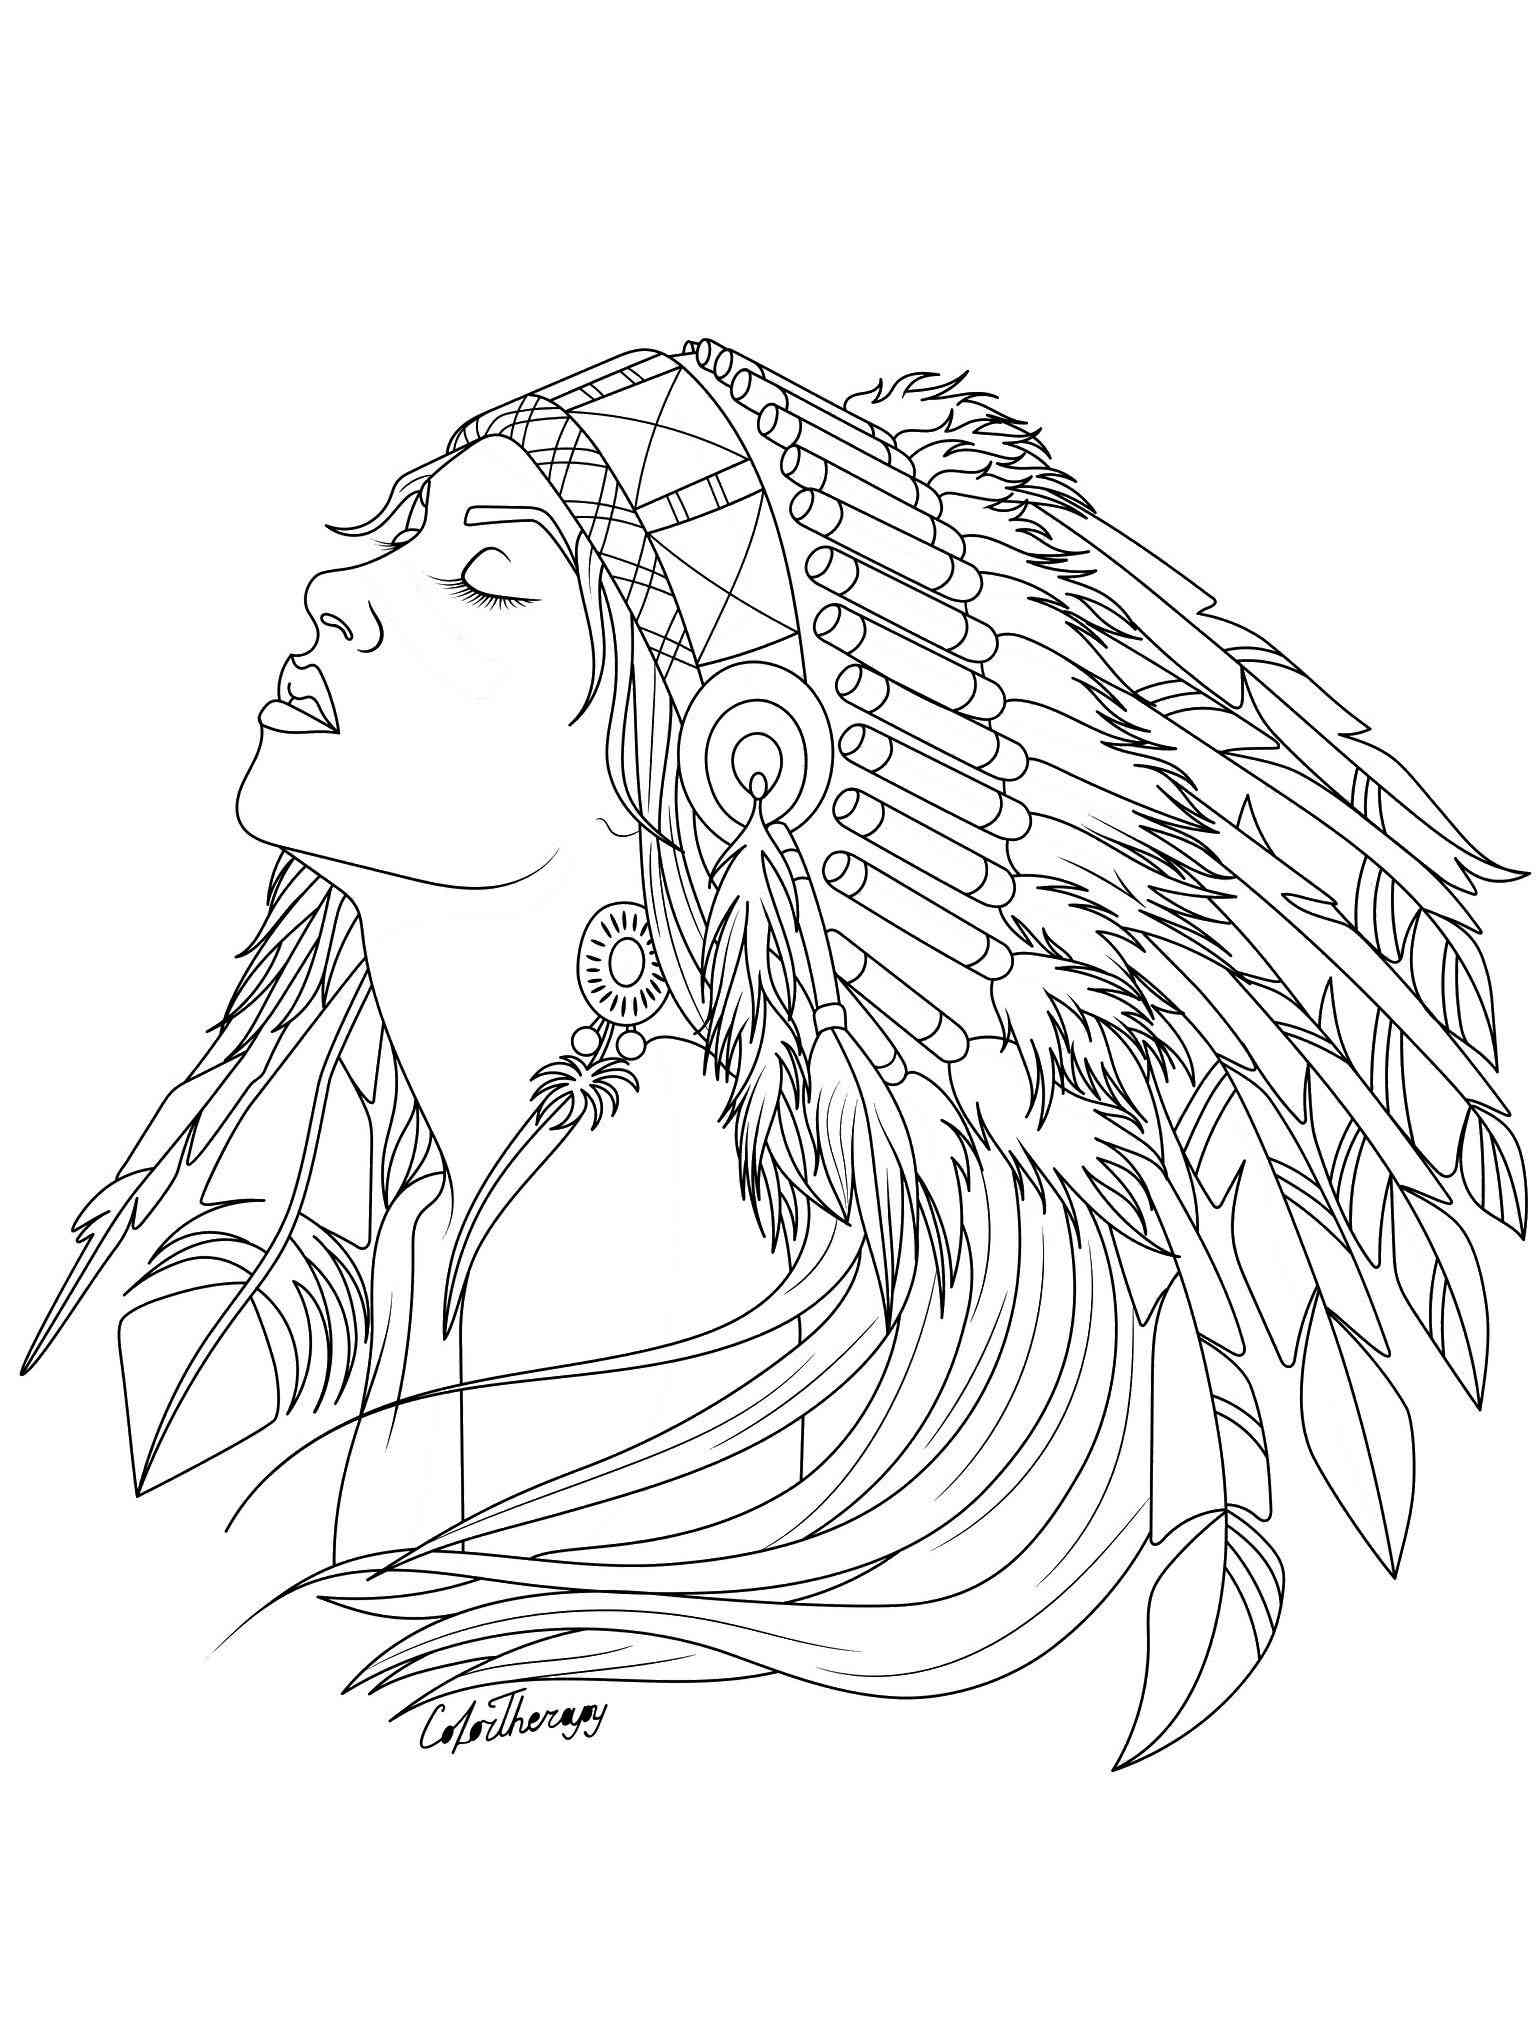 Native american coloring pages for adults